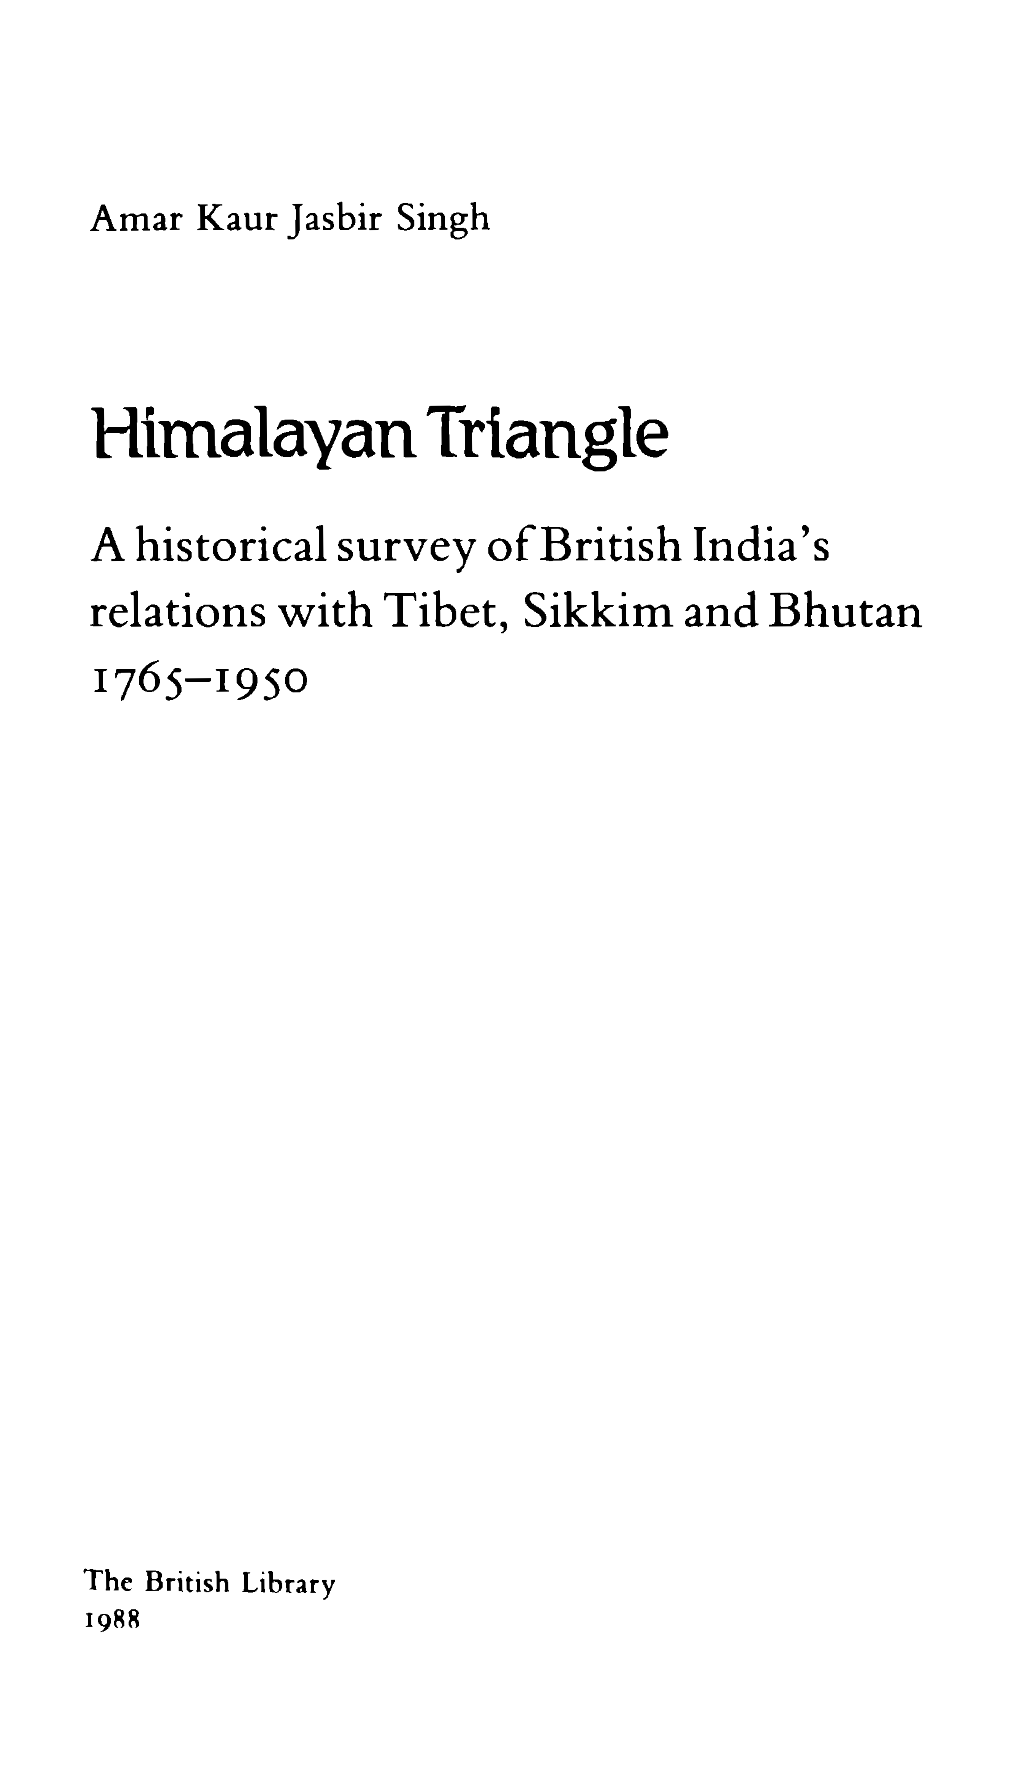 Himalayan Triangle a Historical Survey of British India's Relations with Tibet, Sikkim and Bhutan 1765-1950